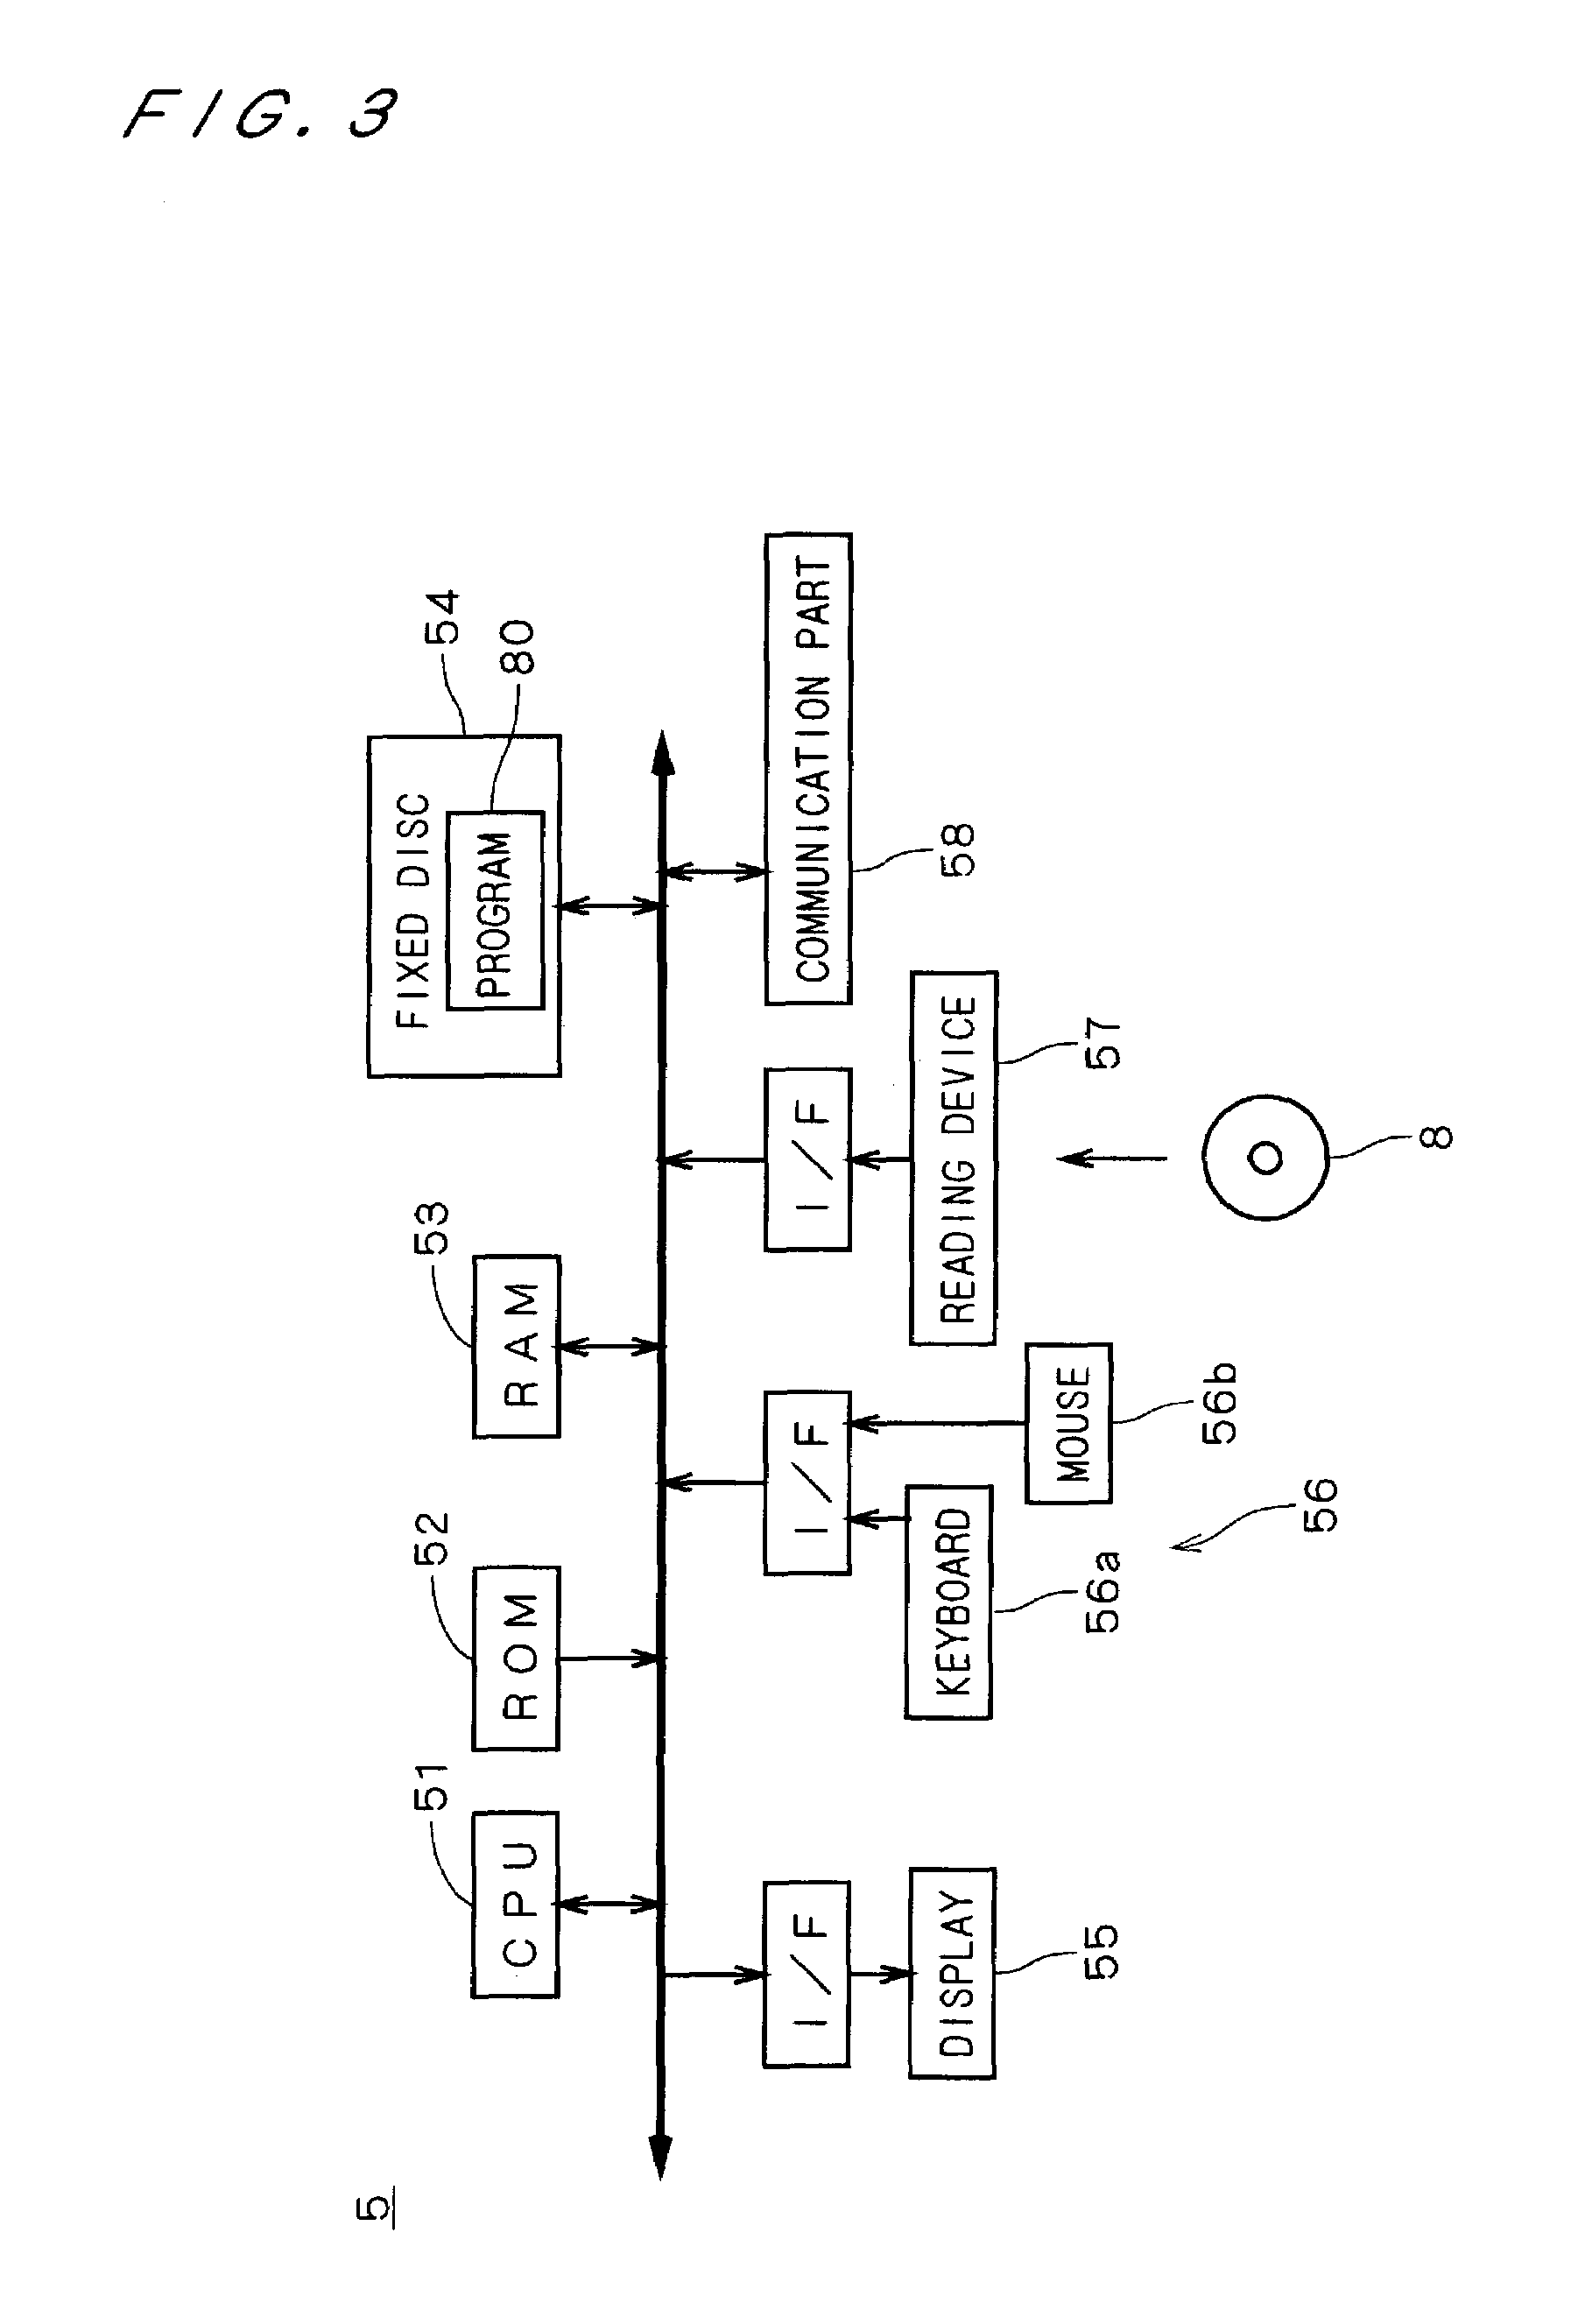 Apparatus and computer-readable medium for assisting image classification